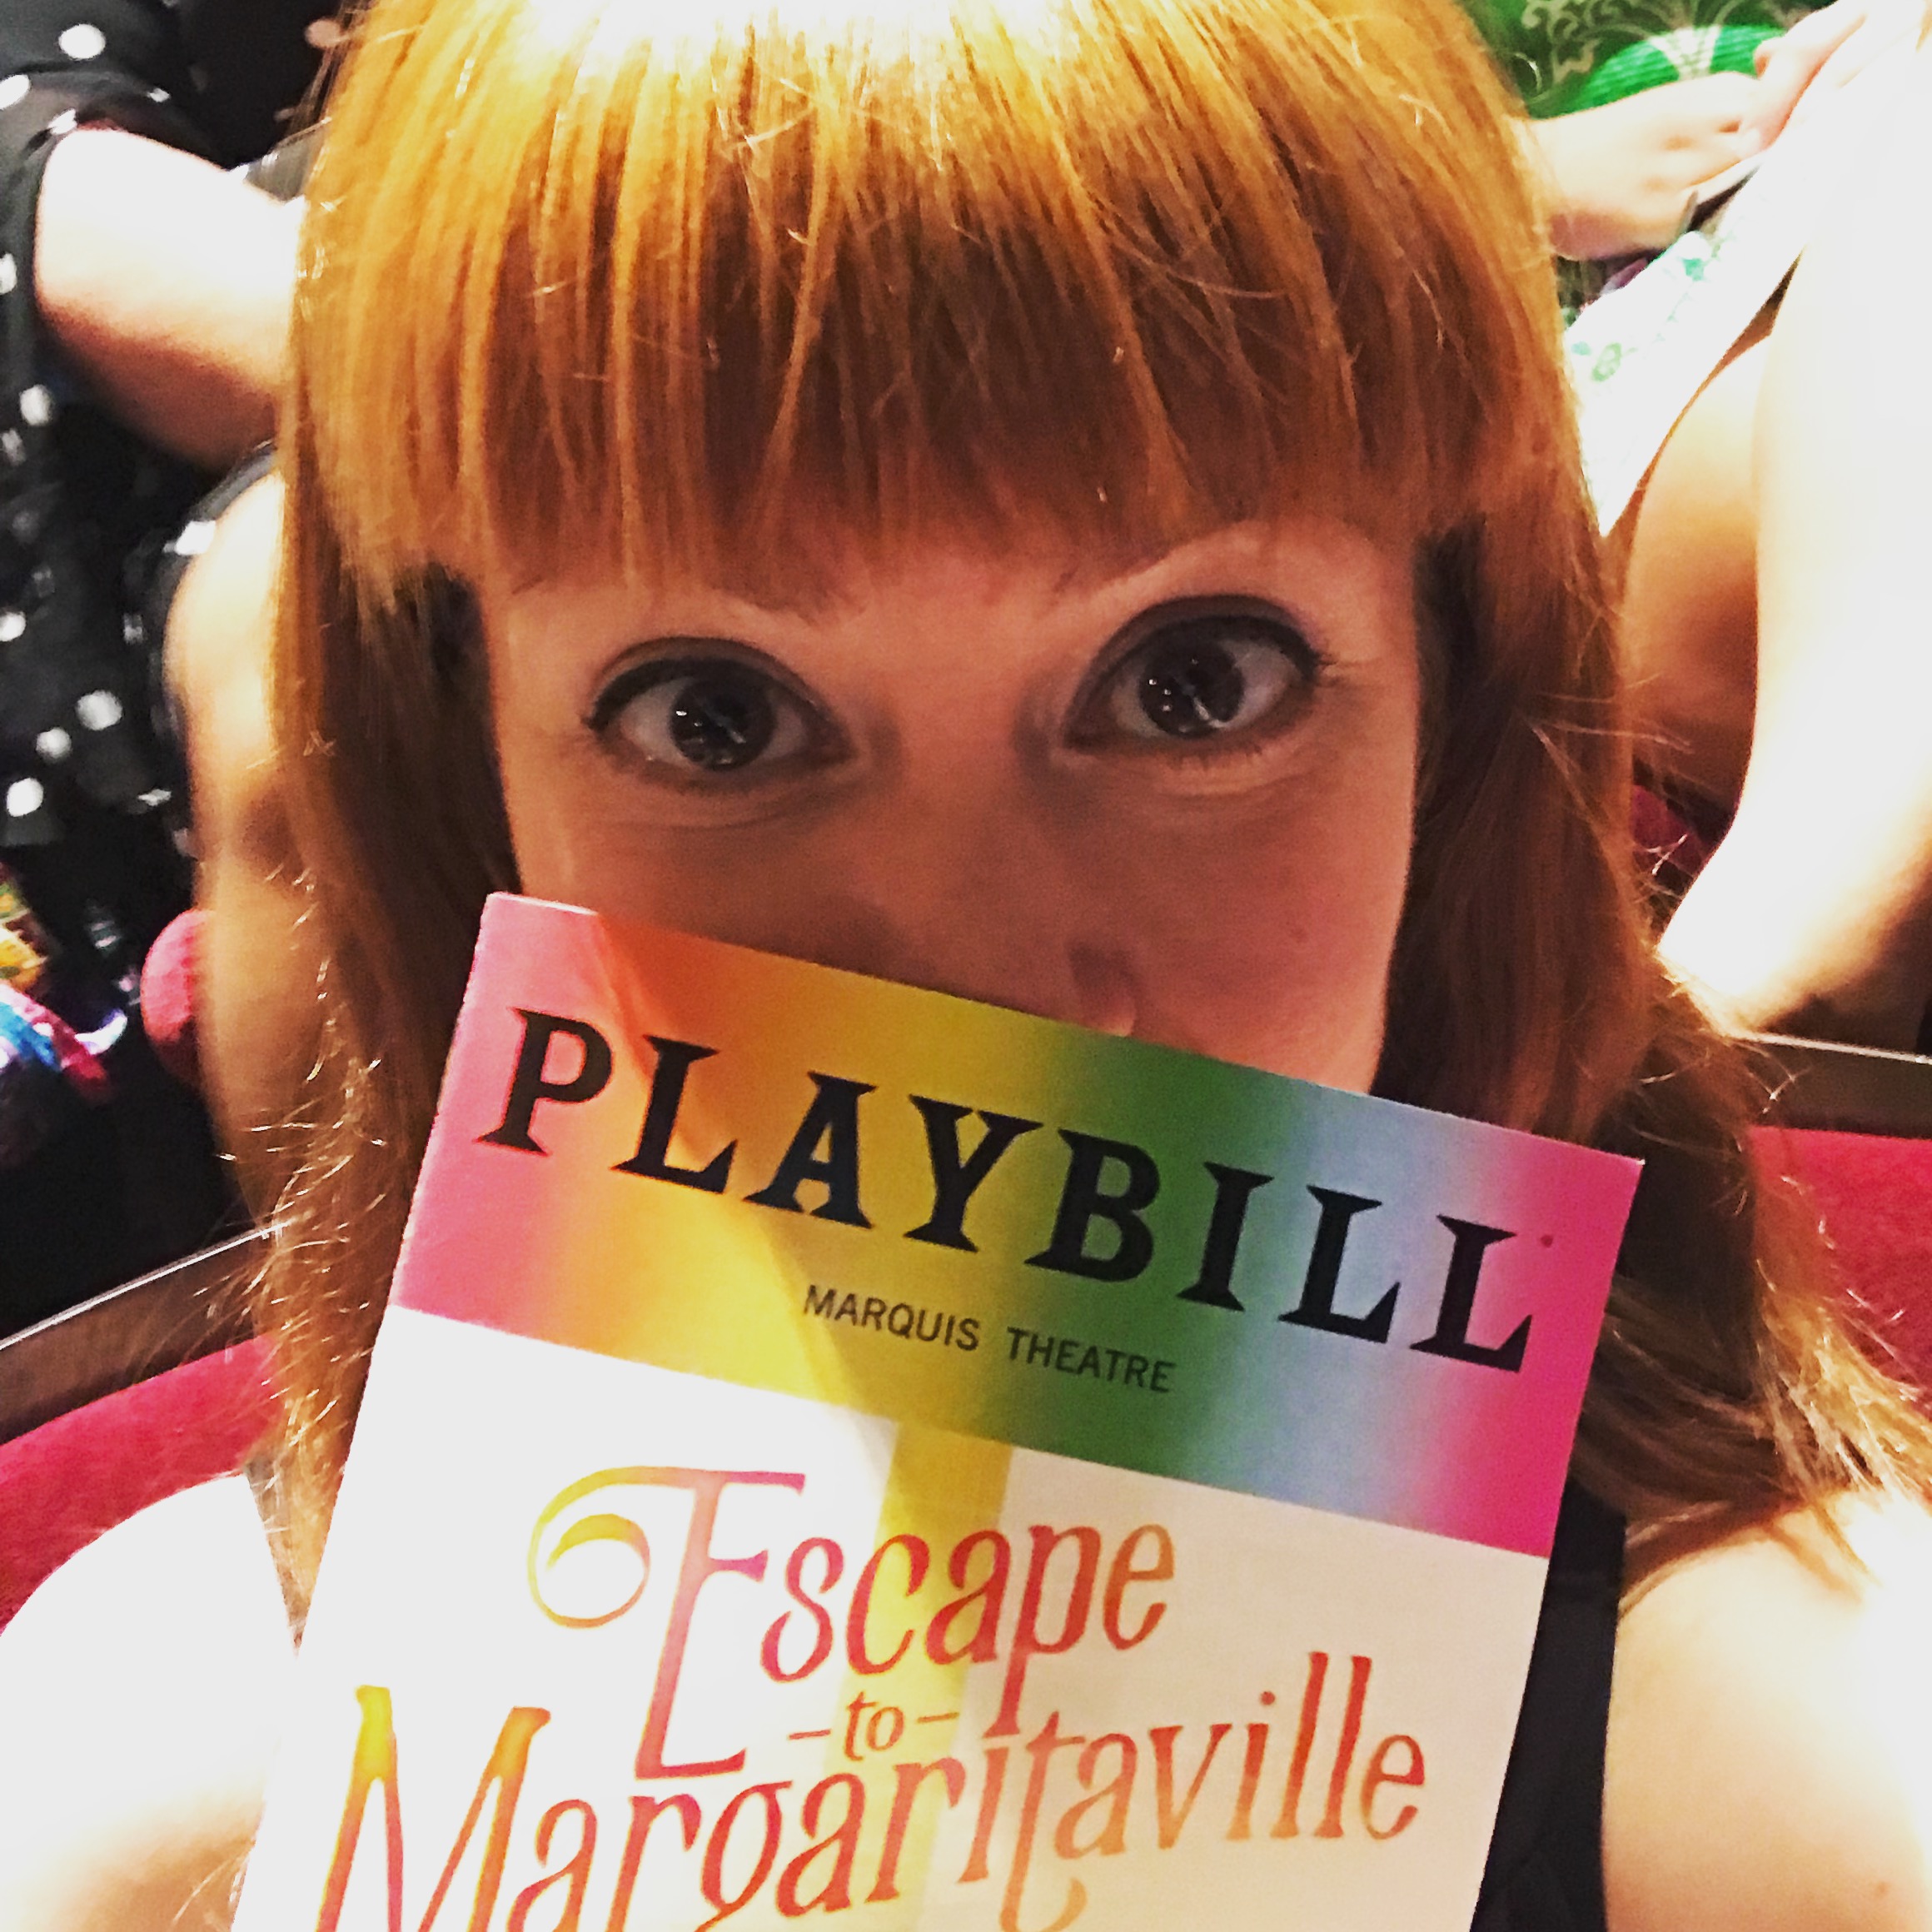 Blair at Escape to Margaritaville on Broadway